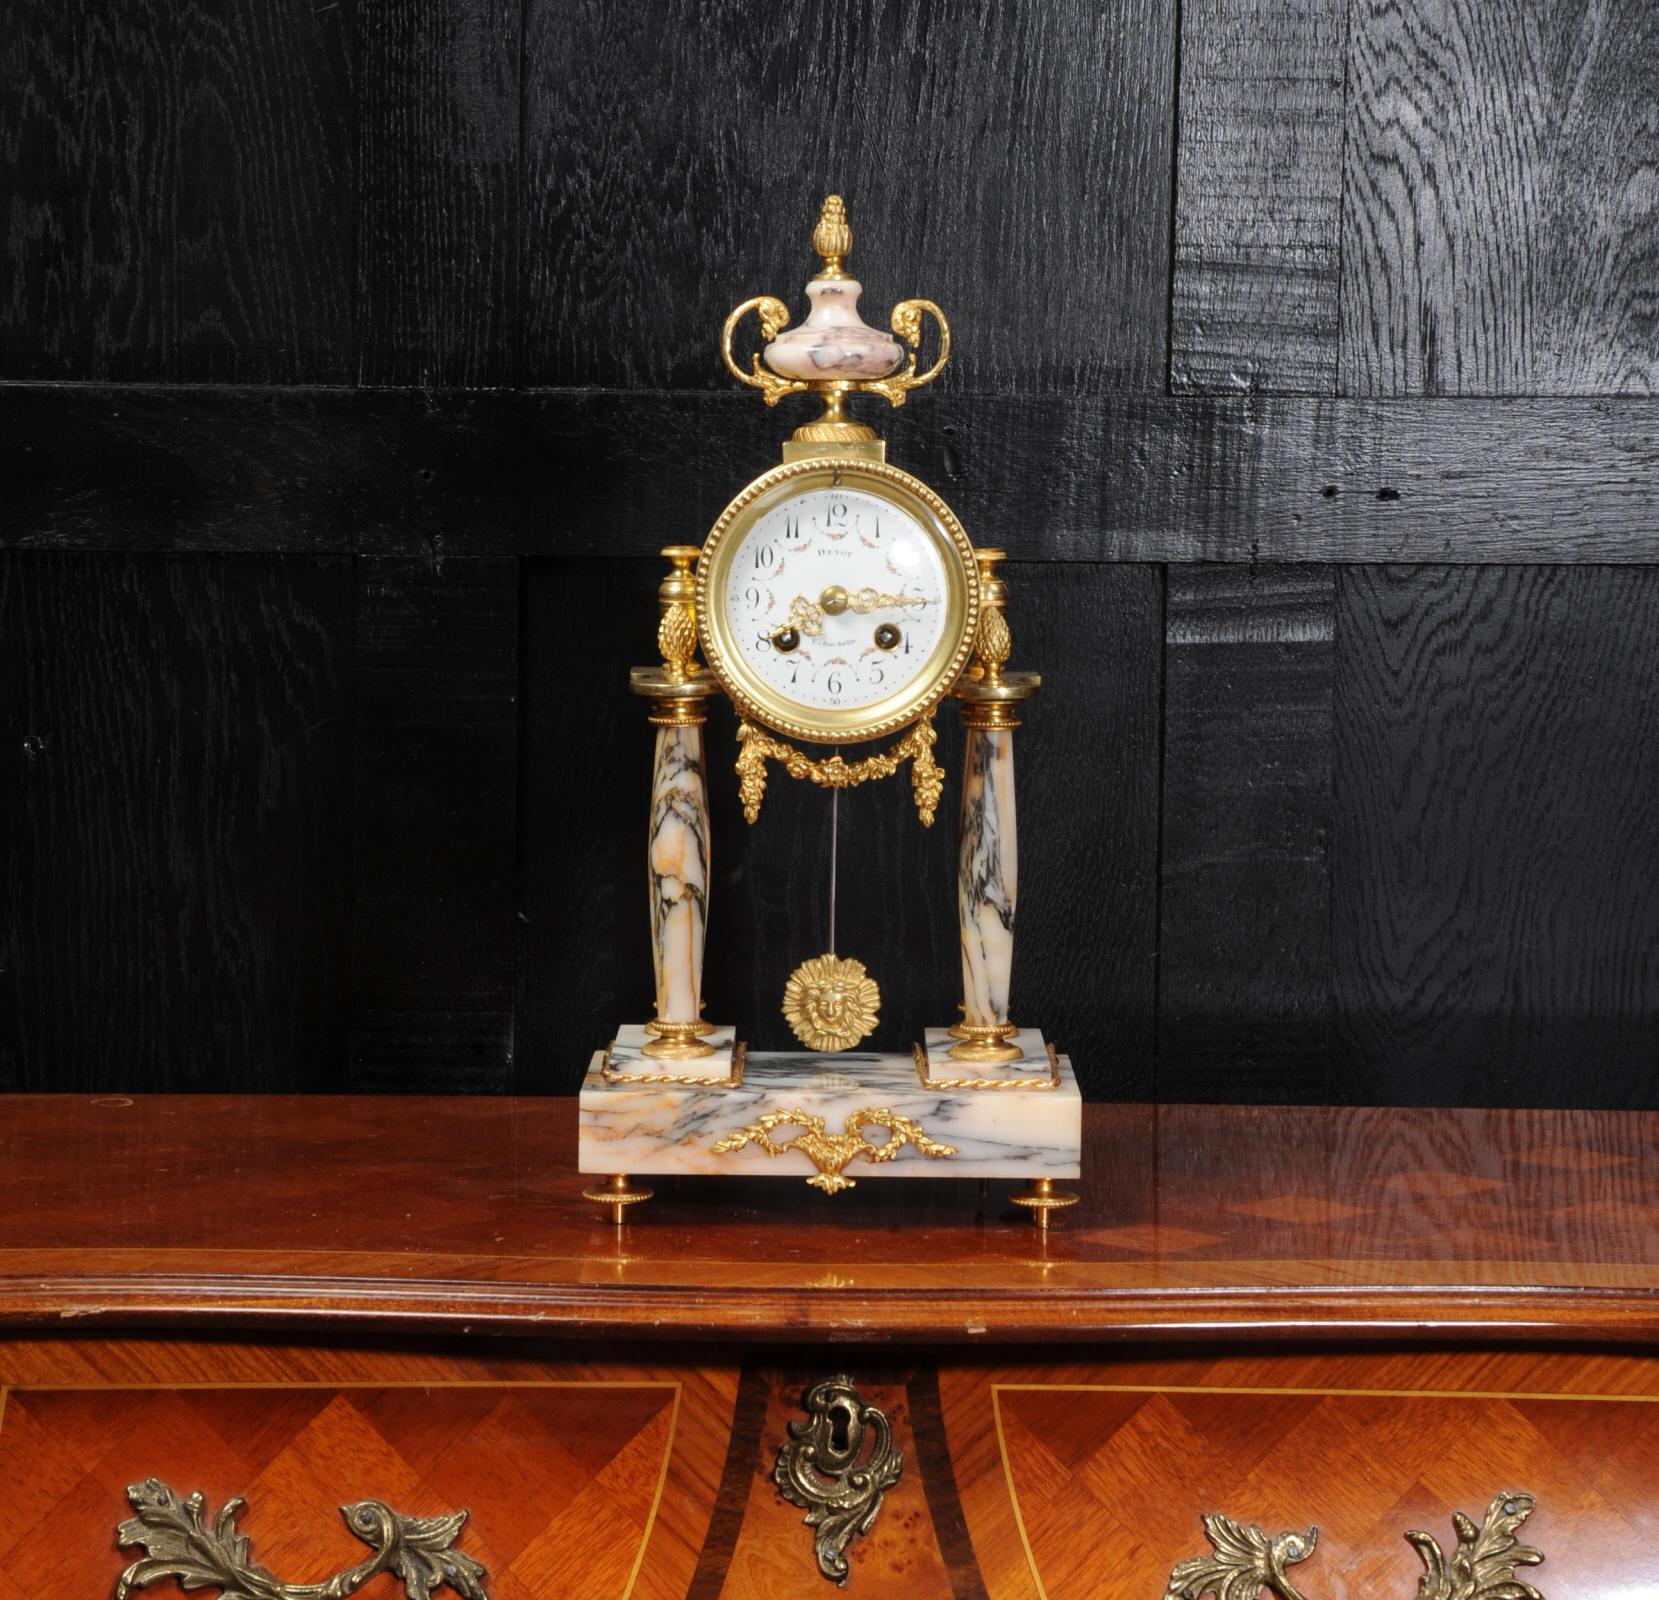 A beautiful original antique French portico clock, Louis XVI style, circa 1880. It is modelled in a stunning variegated specimen marble, salmon pink and silver blue veining, and is mounted with ormolu (finely gilded bronze). The movement is held